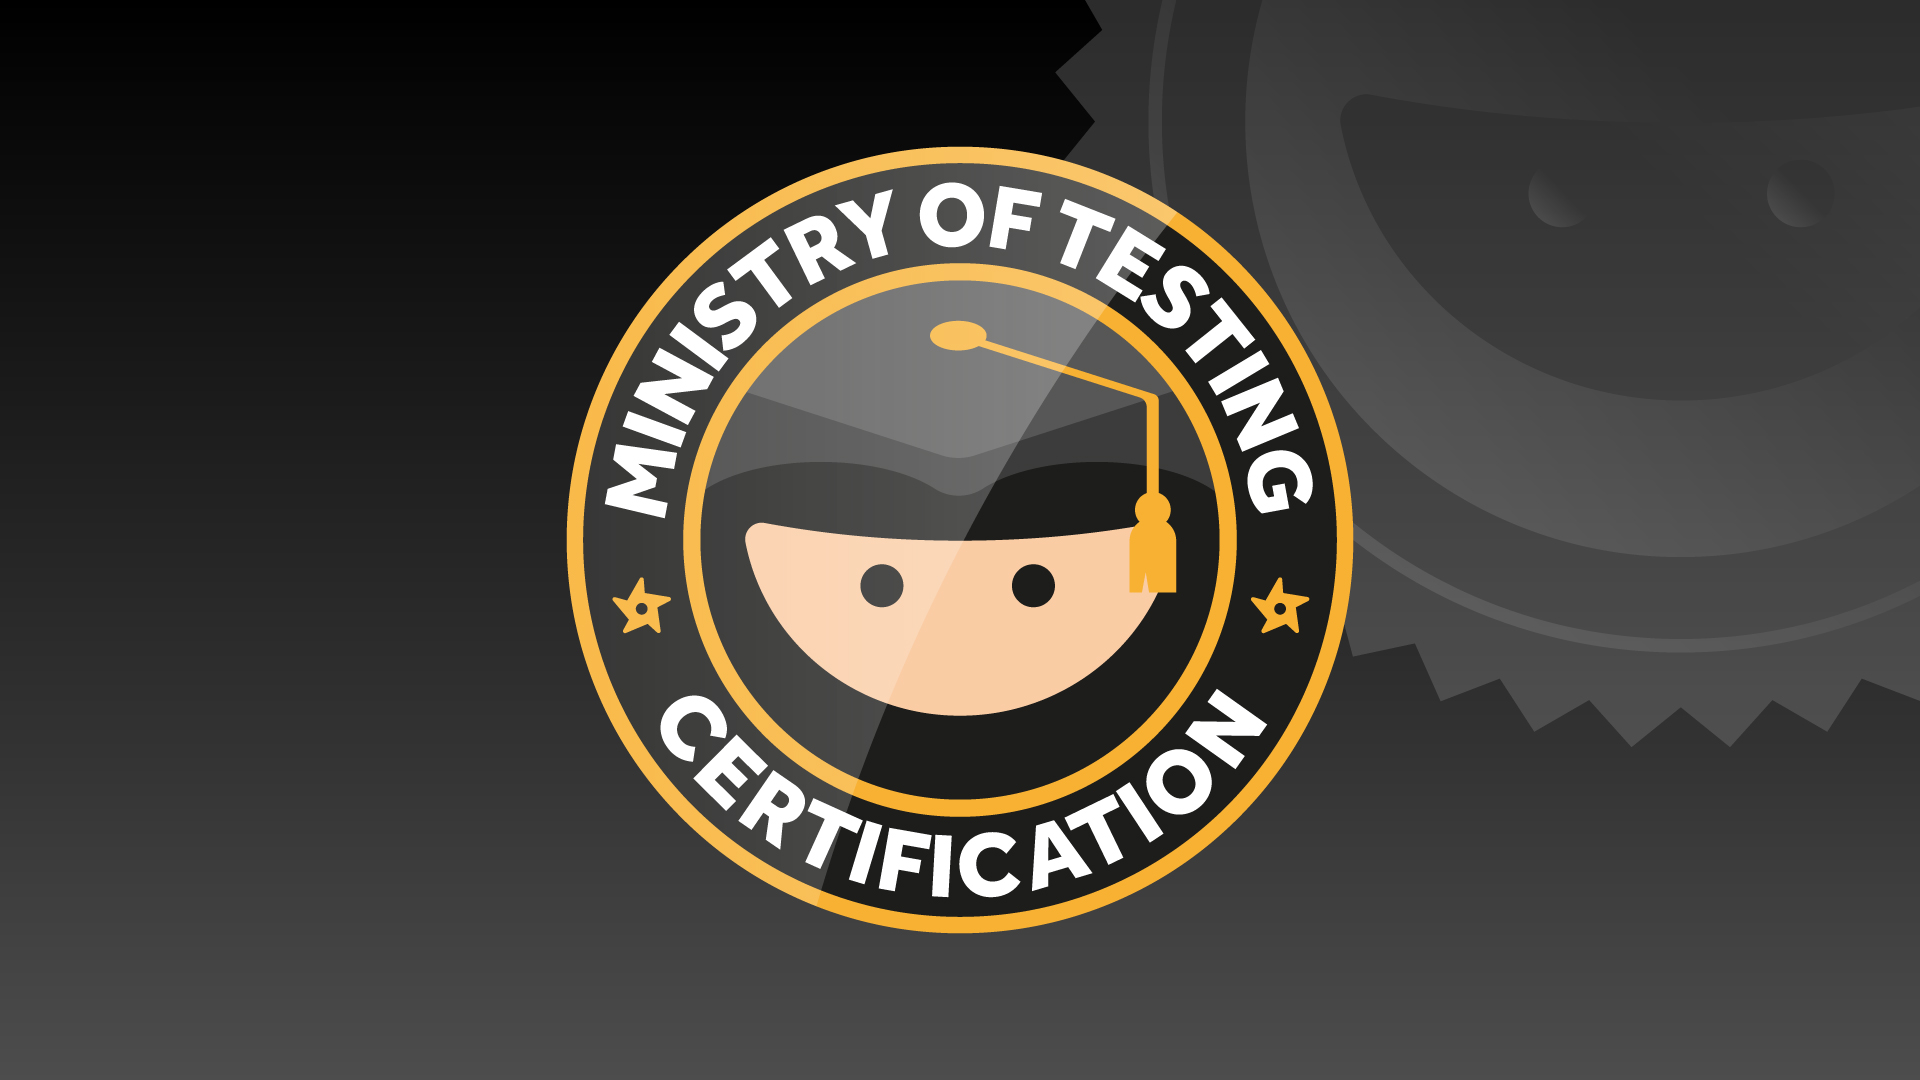 Introducing Our New MoT Certifications in Test Automation!